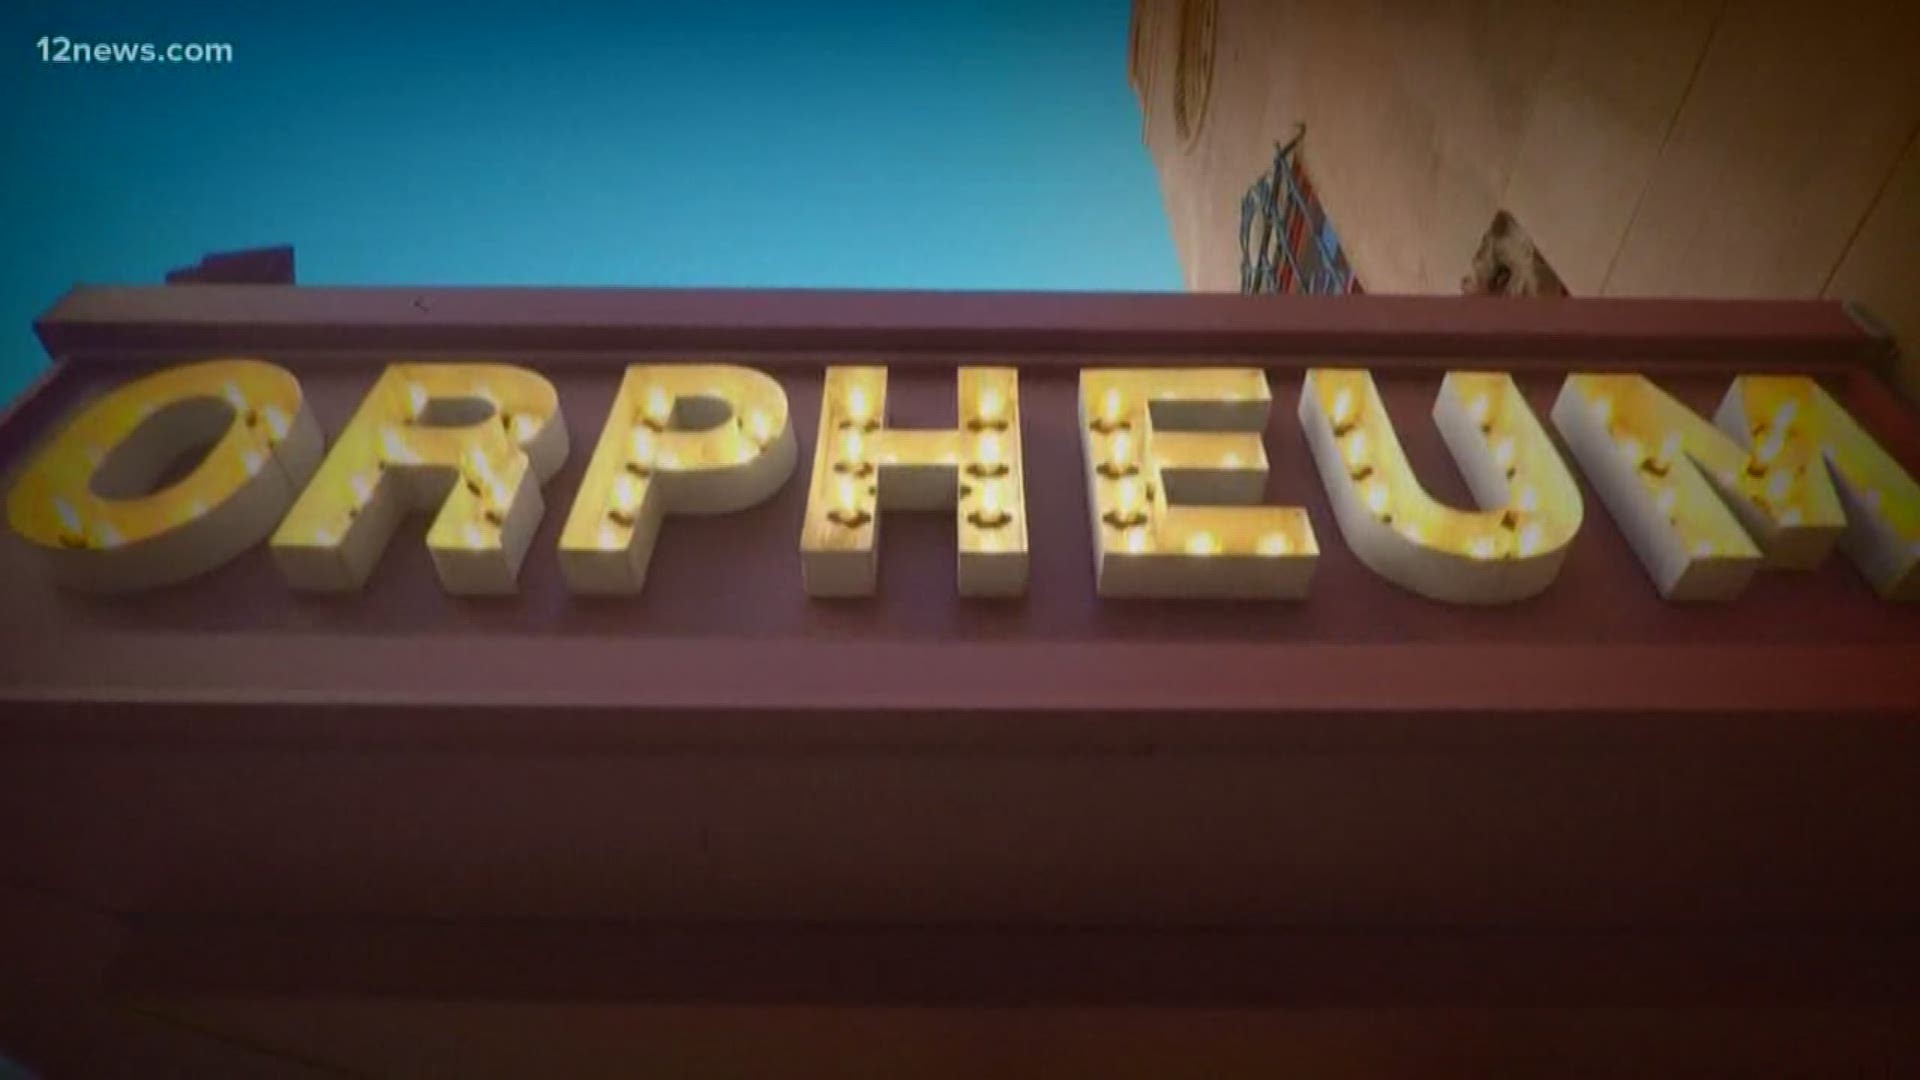 Built in 1929, the historic Orpheum Theatre is celebrating its 90th anniversary!